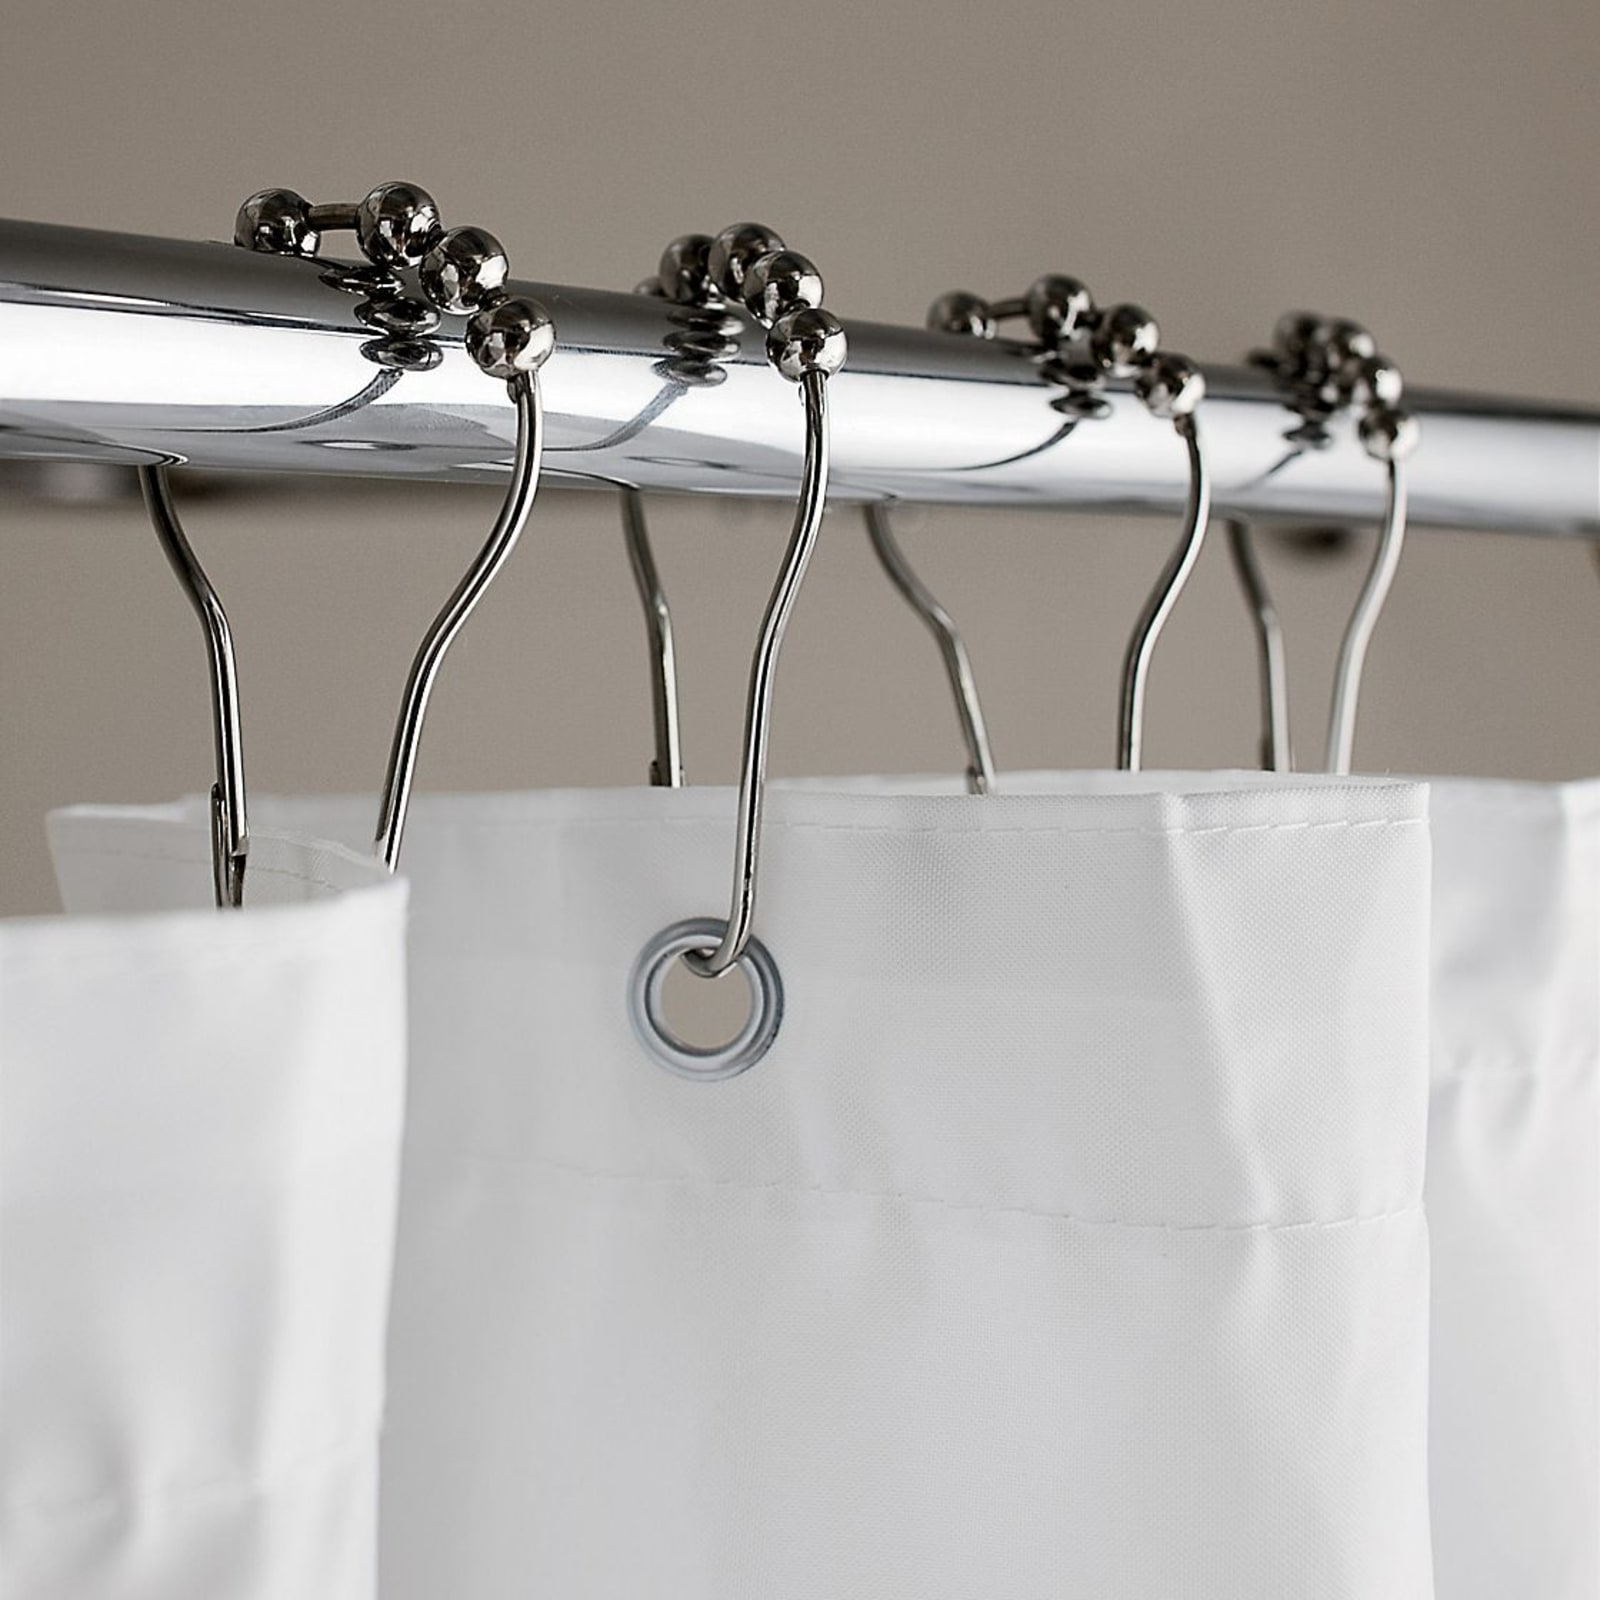 Roller Shower Curtain Hooks The Company